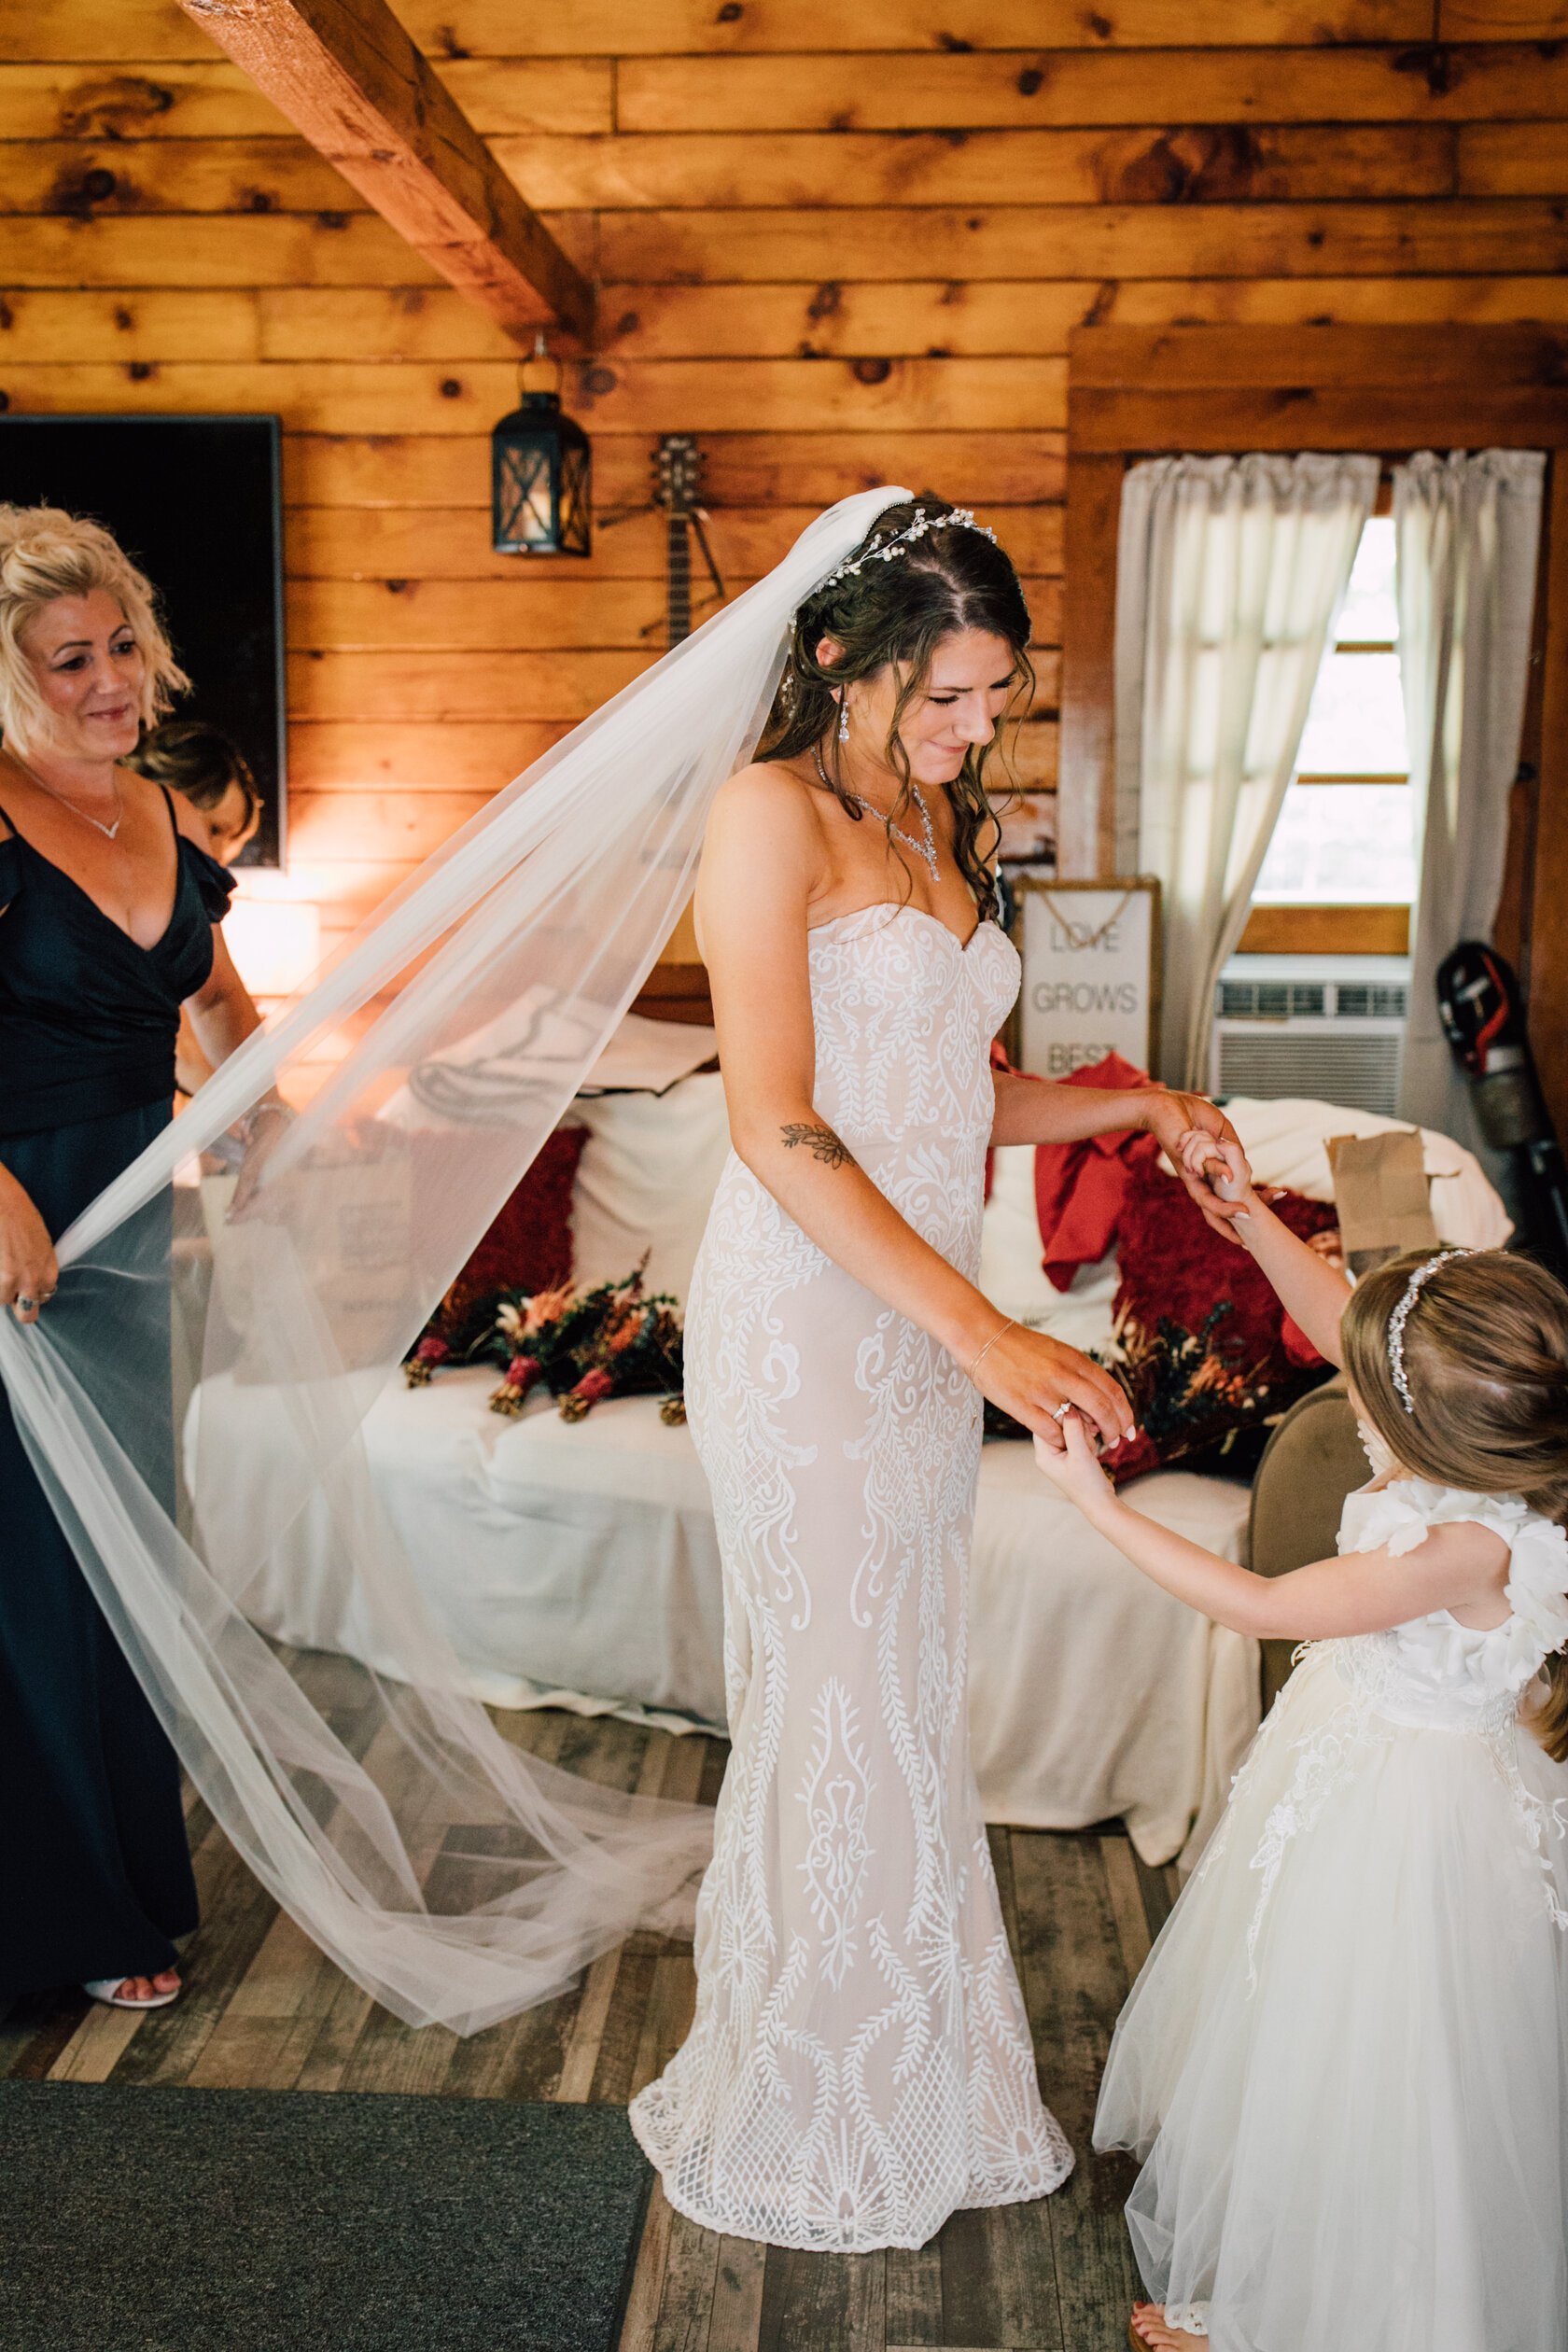  The bride stands smiling at her daughter while holding her hands as her mother adjusts her veil before her rustic wedding 